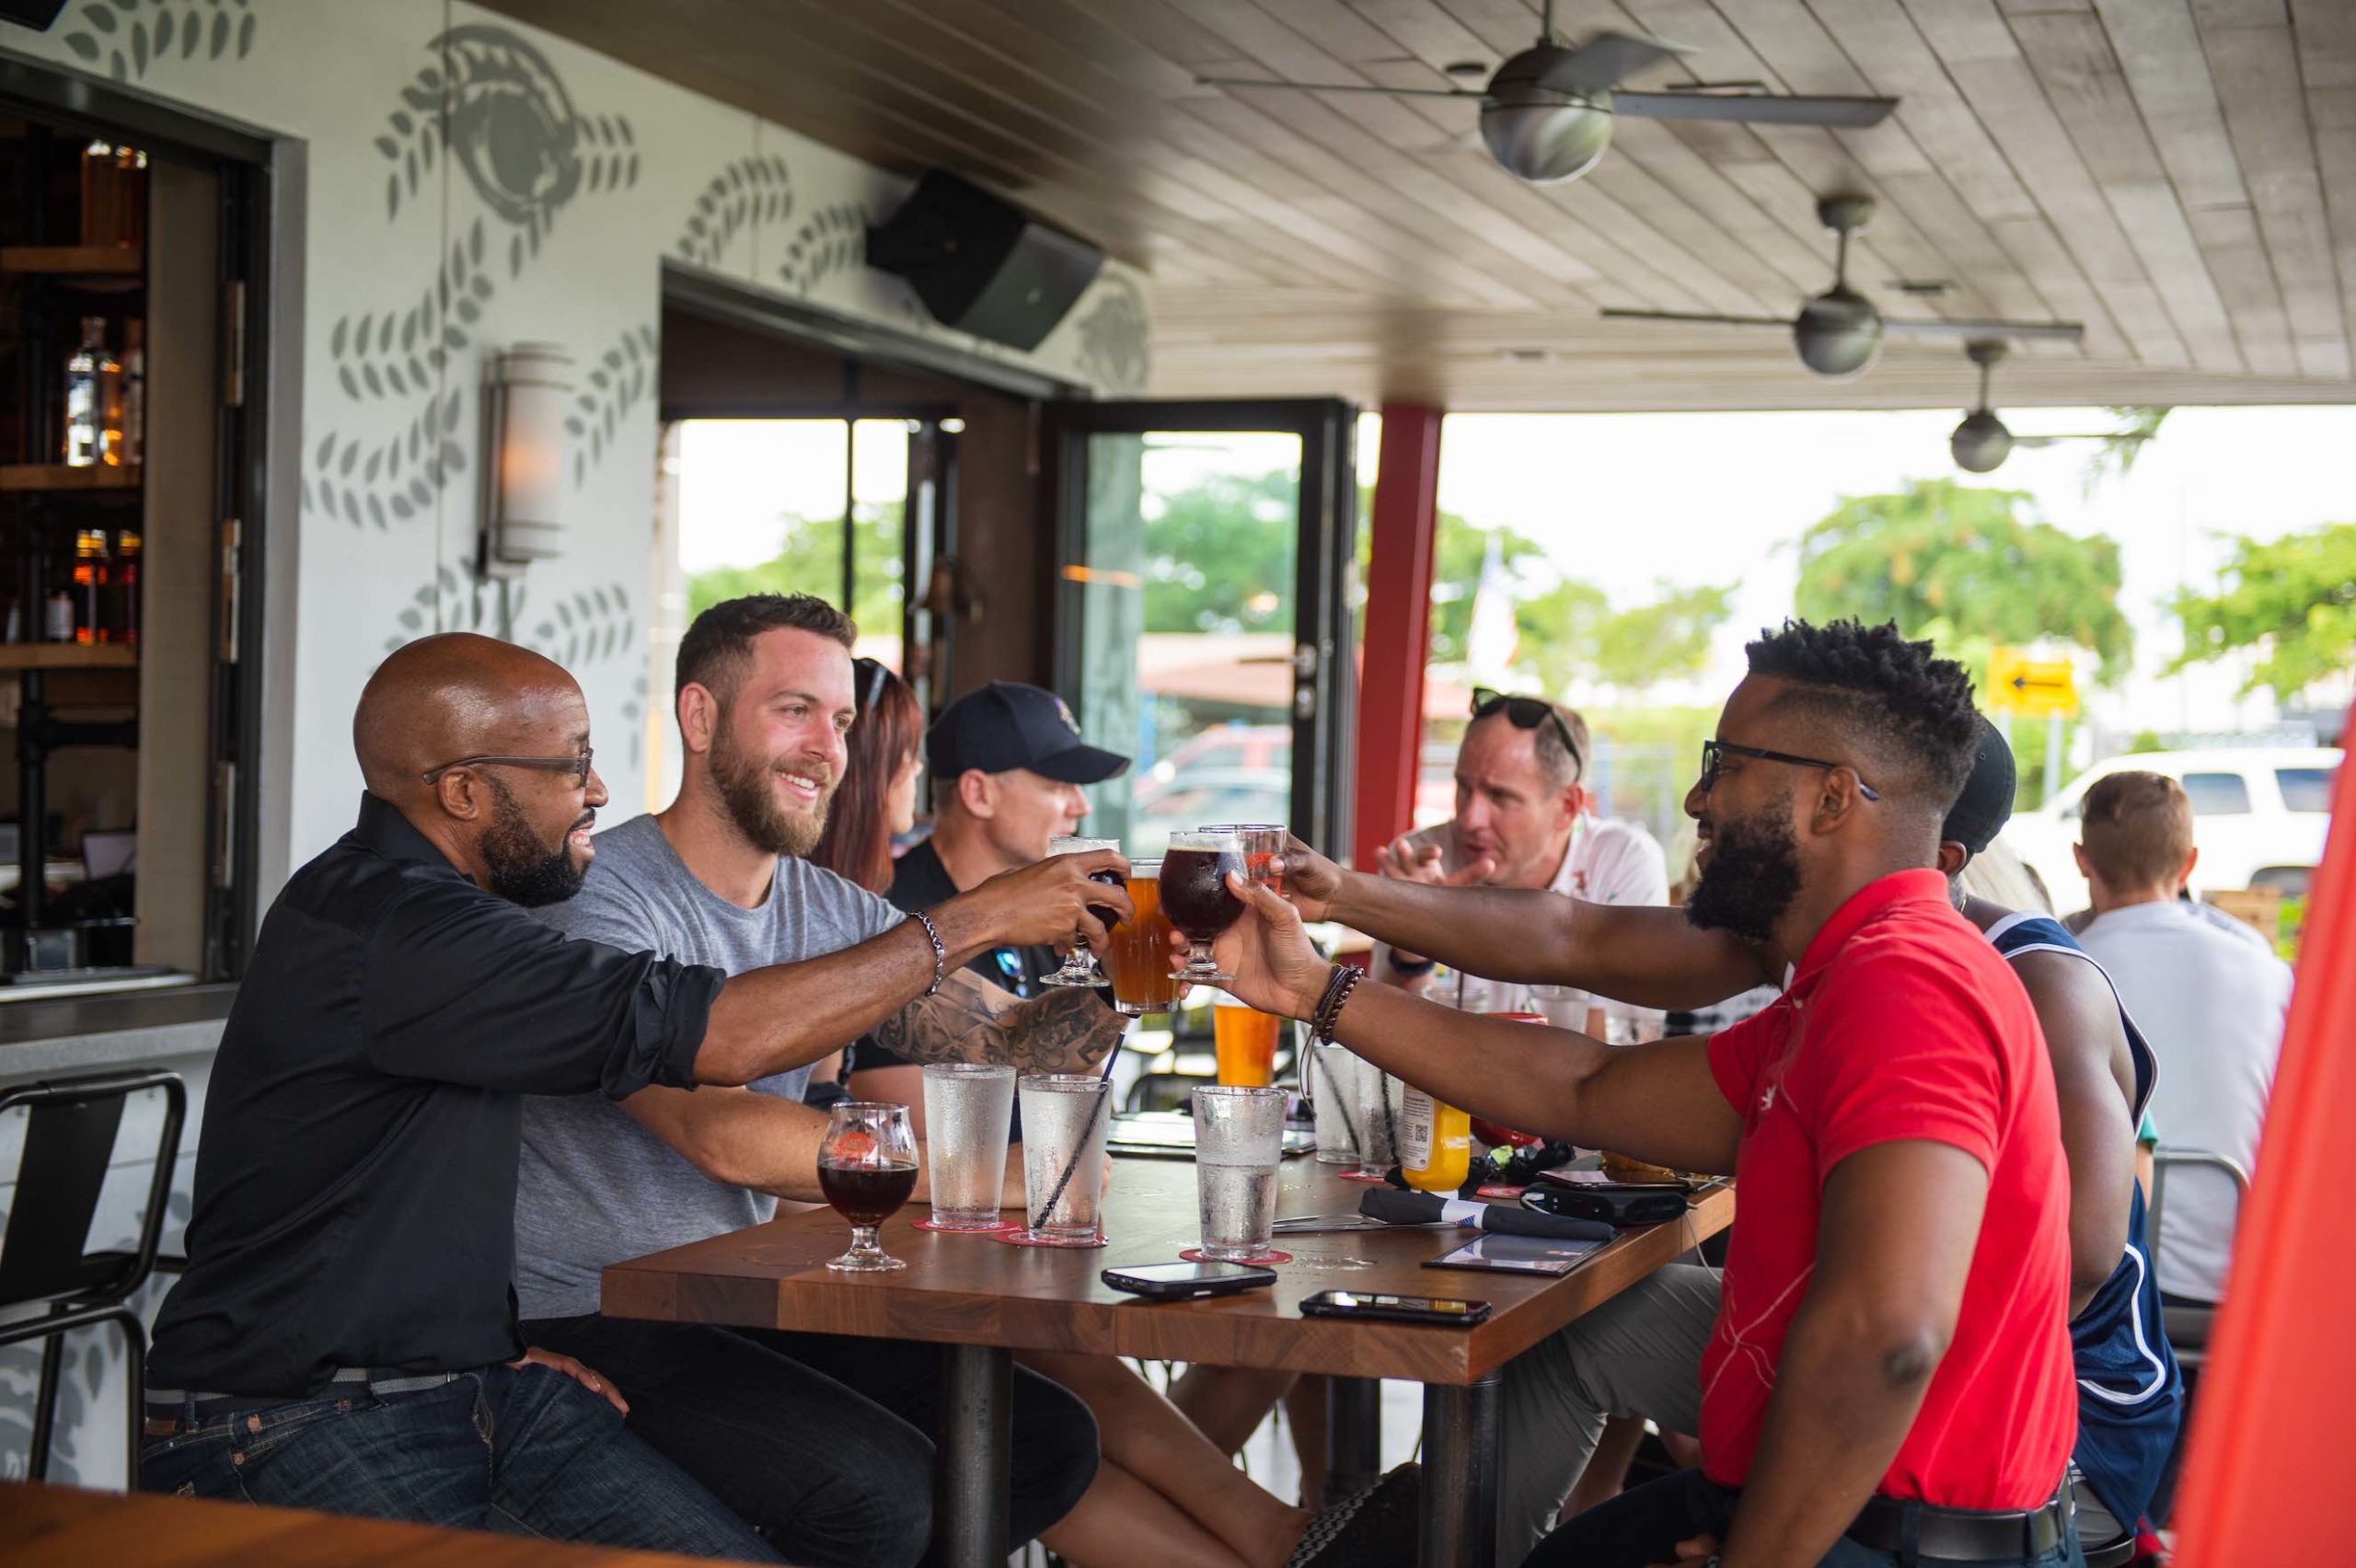 Freebird Real Estate Experts East Fort Lauderdale Group of men sitting at a wooden table with some toasting drinks and smiling in a restaurant